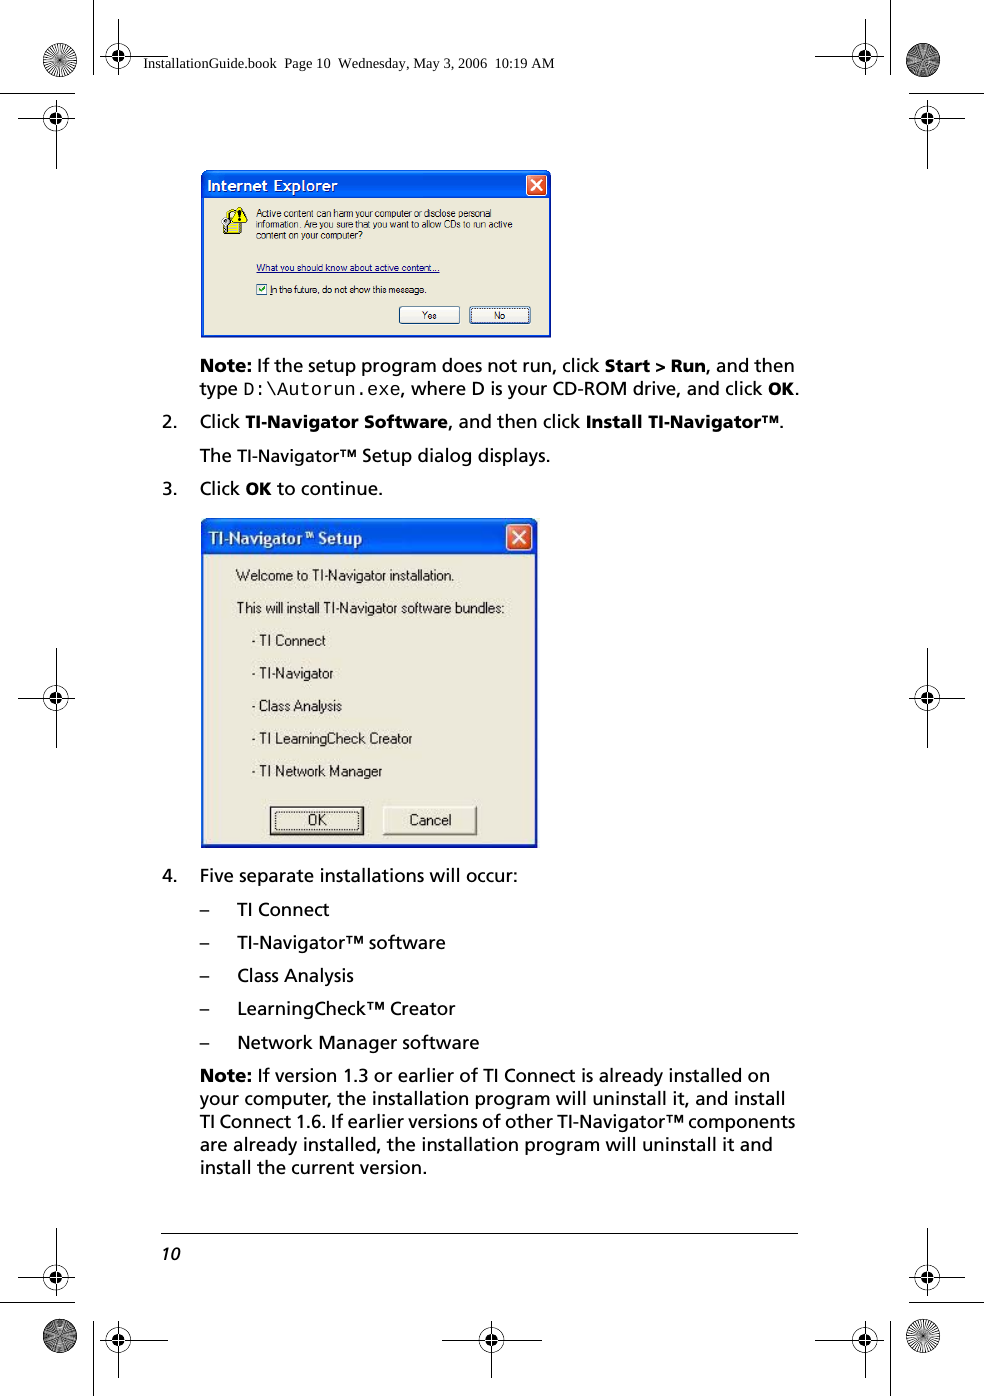 10Note: If the setup program does not run, click Start &gt; Run, and then type D:\Autorun.exe, where D is your CD-ROM drive, and click OK.2. Click TI-Navigator Software, and then click Install TI-Navigator™. The TI-Navigator™ Setup dialog displays.3. Click OK to continue.4. Five separate installations will occur:– TI Connect– TI-Navigator™ software– Class Analysis– LearningCheck™ Creator– Network Manager softwareNote: If version 1.3 or earlier of TI Connect is already installed on your computer, the installation program will uninstall it, and install TI Connect 1.6. If earlier versions of other TI-Navigator™ components are already installed, the installation program will uninstall it and install the current version.InstallationGuide.book  Page 10  Wednesday, May 3, 2006  10:19 AM